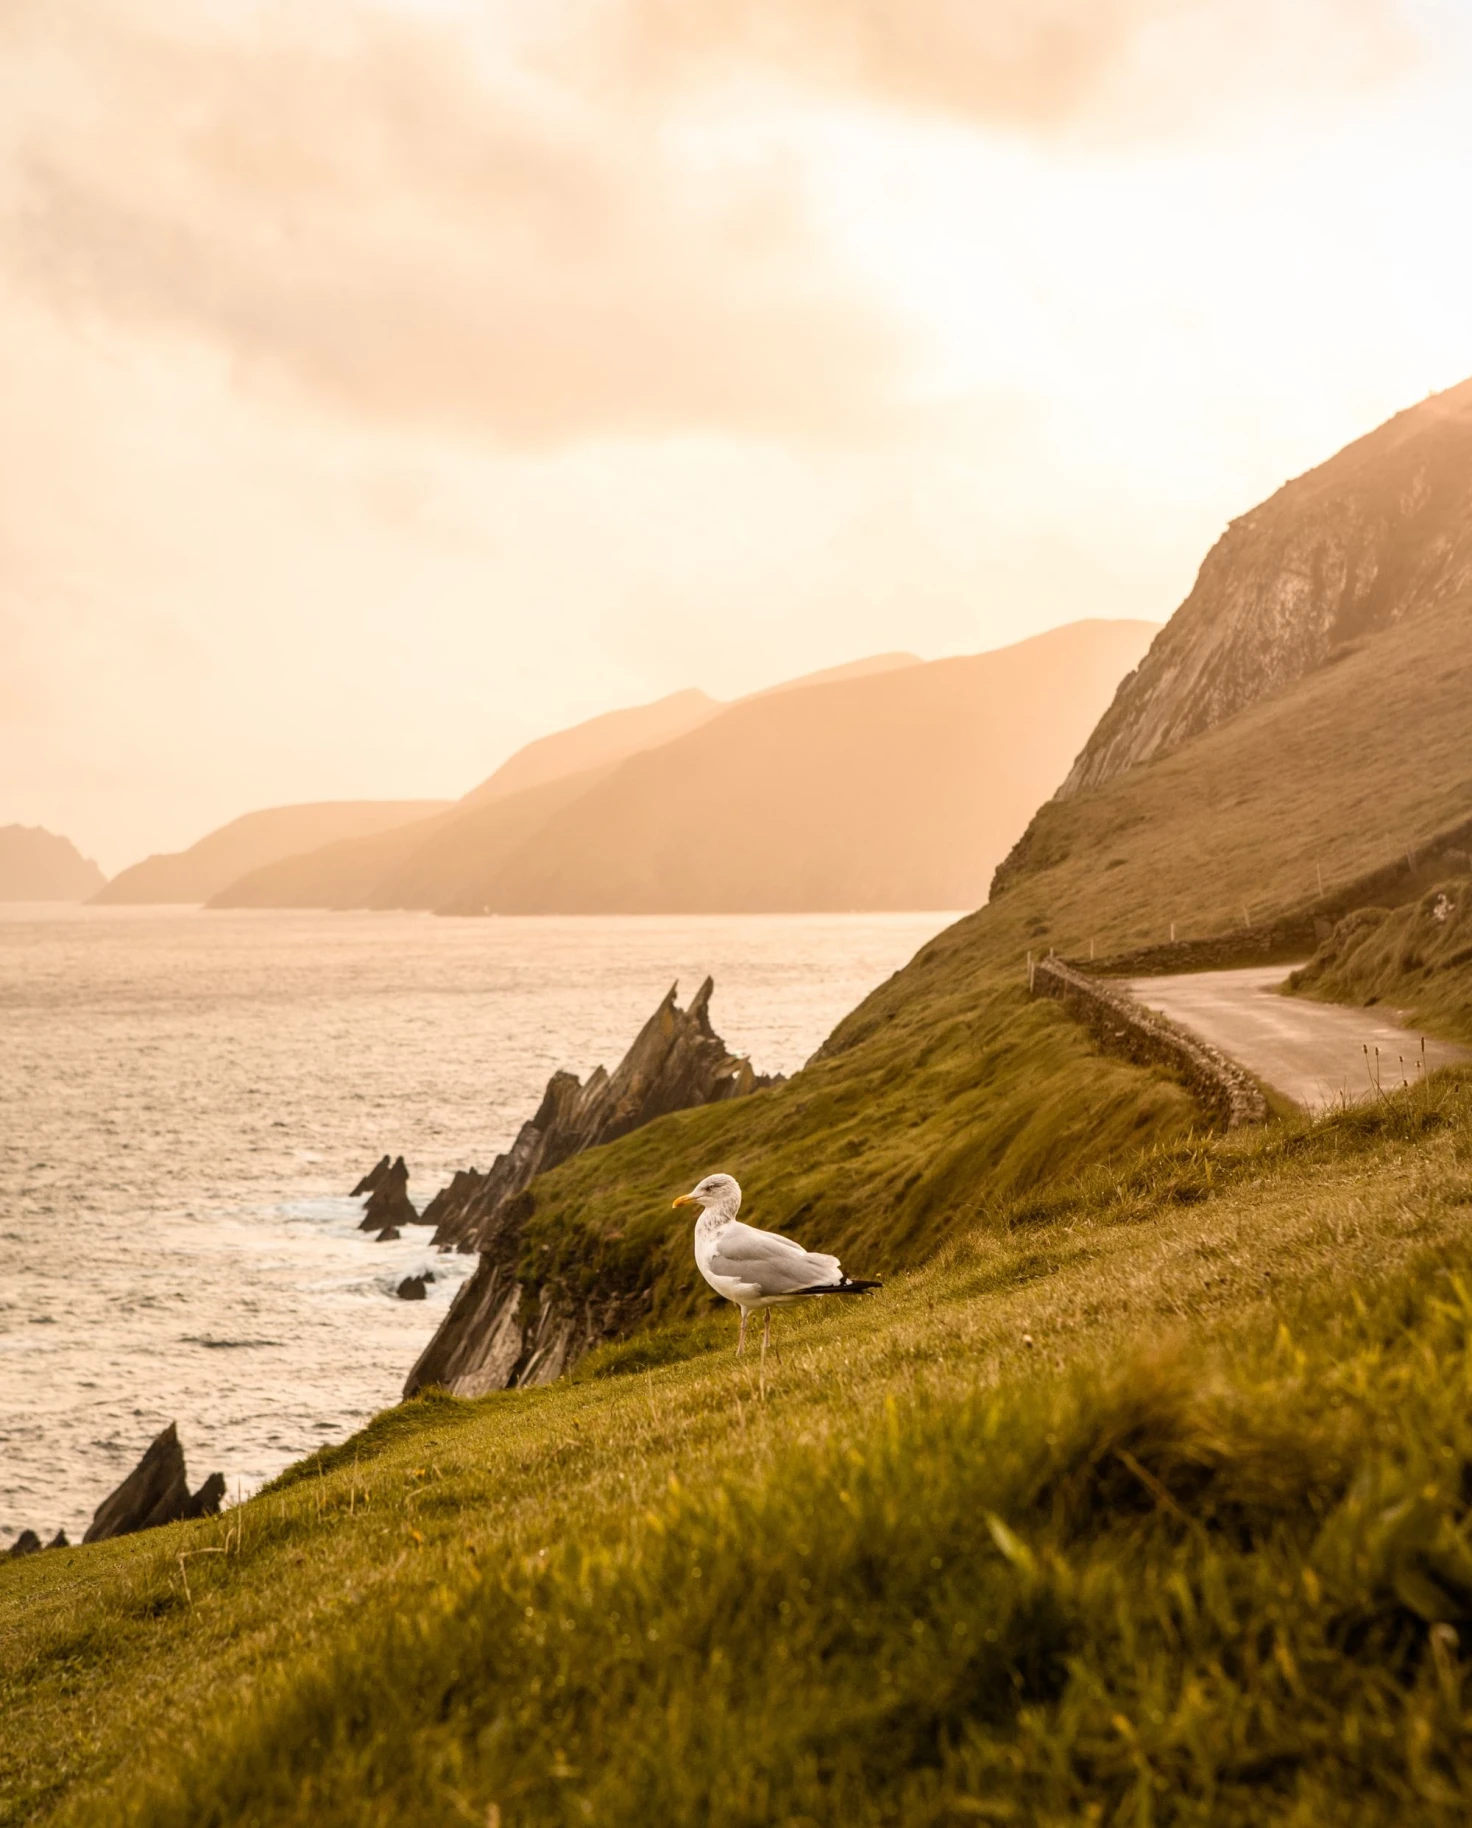 grassy cliffs into ocean with perched seagull at golden hour